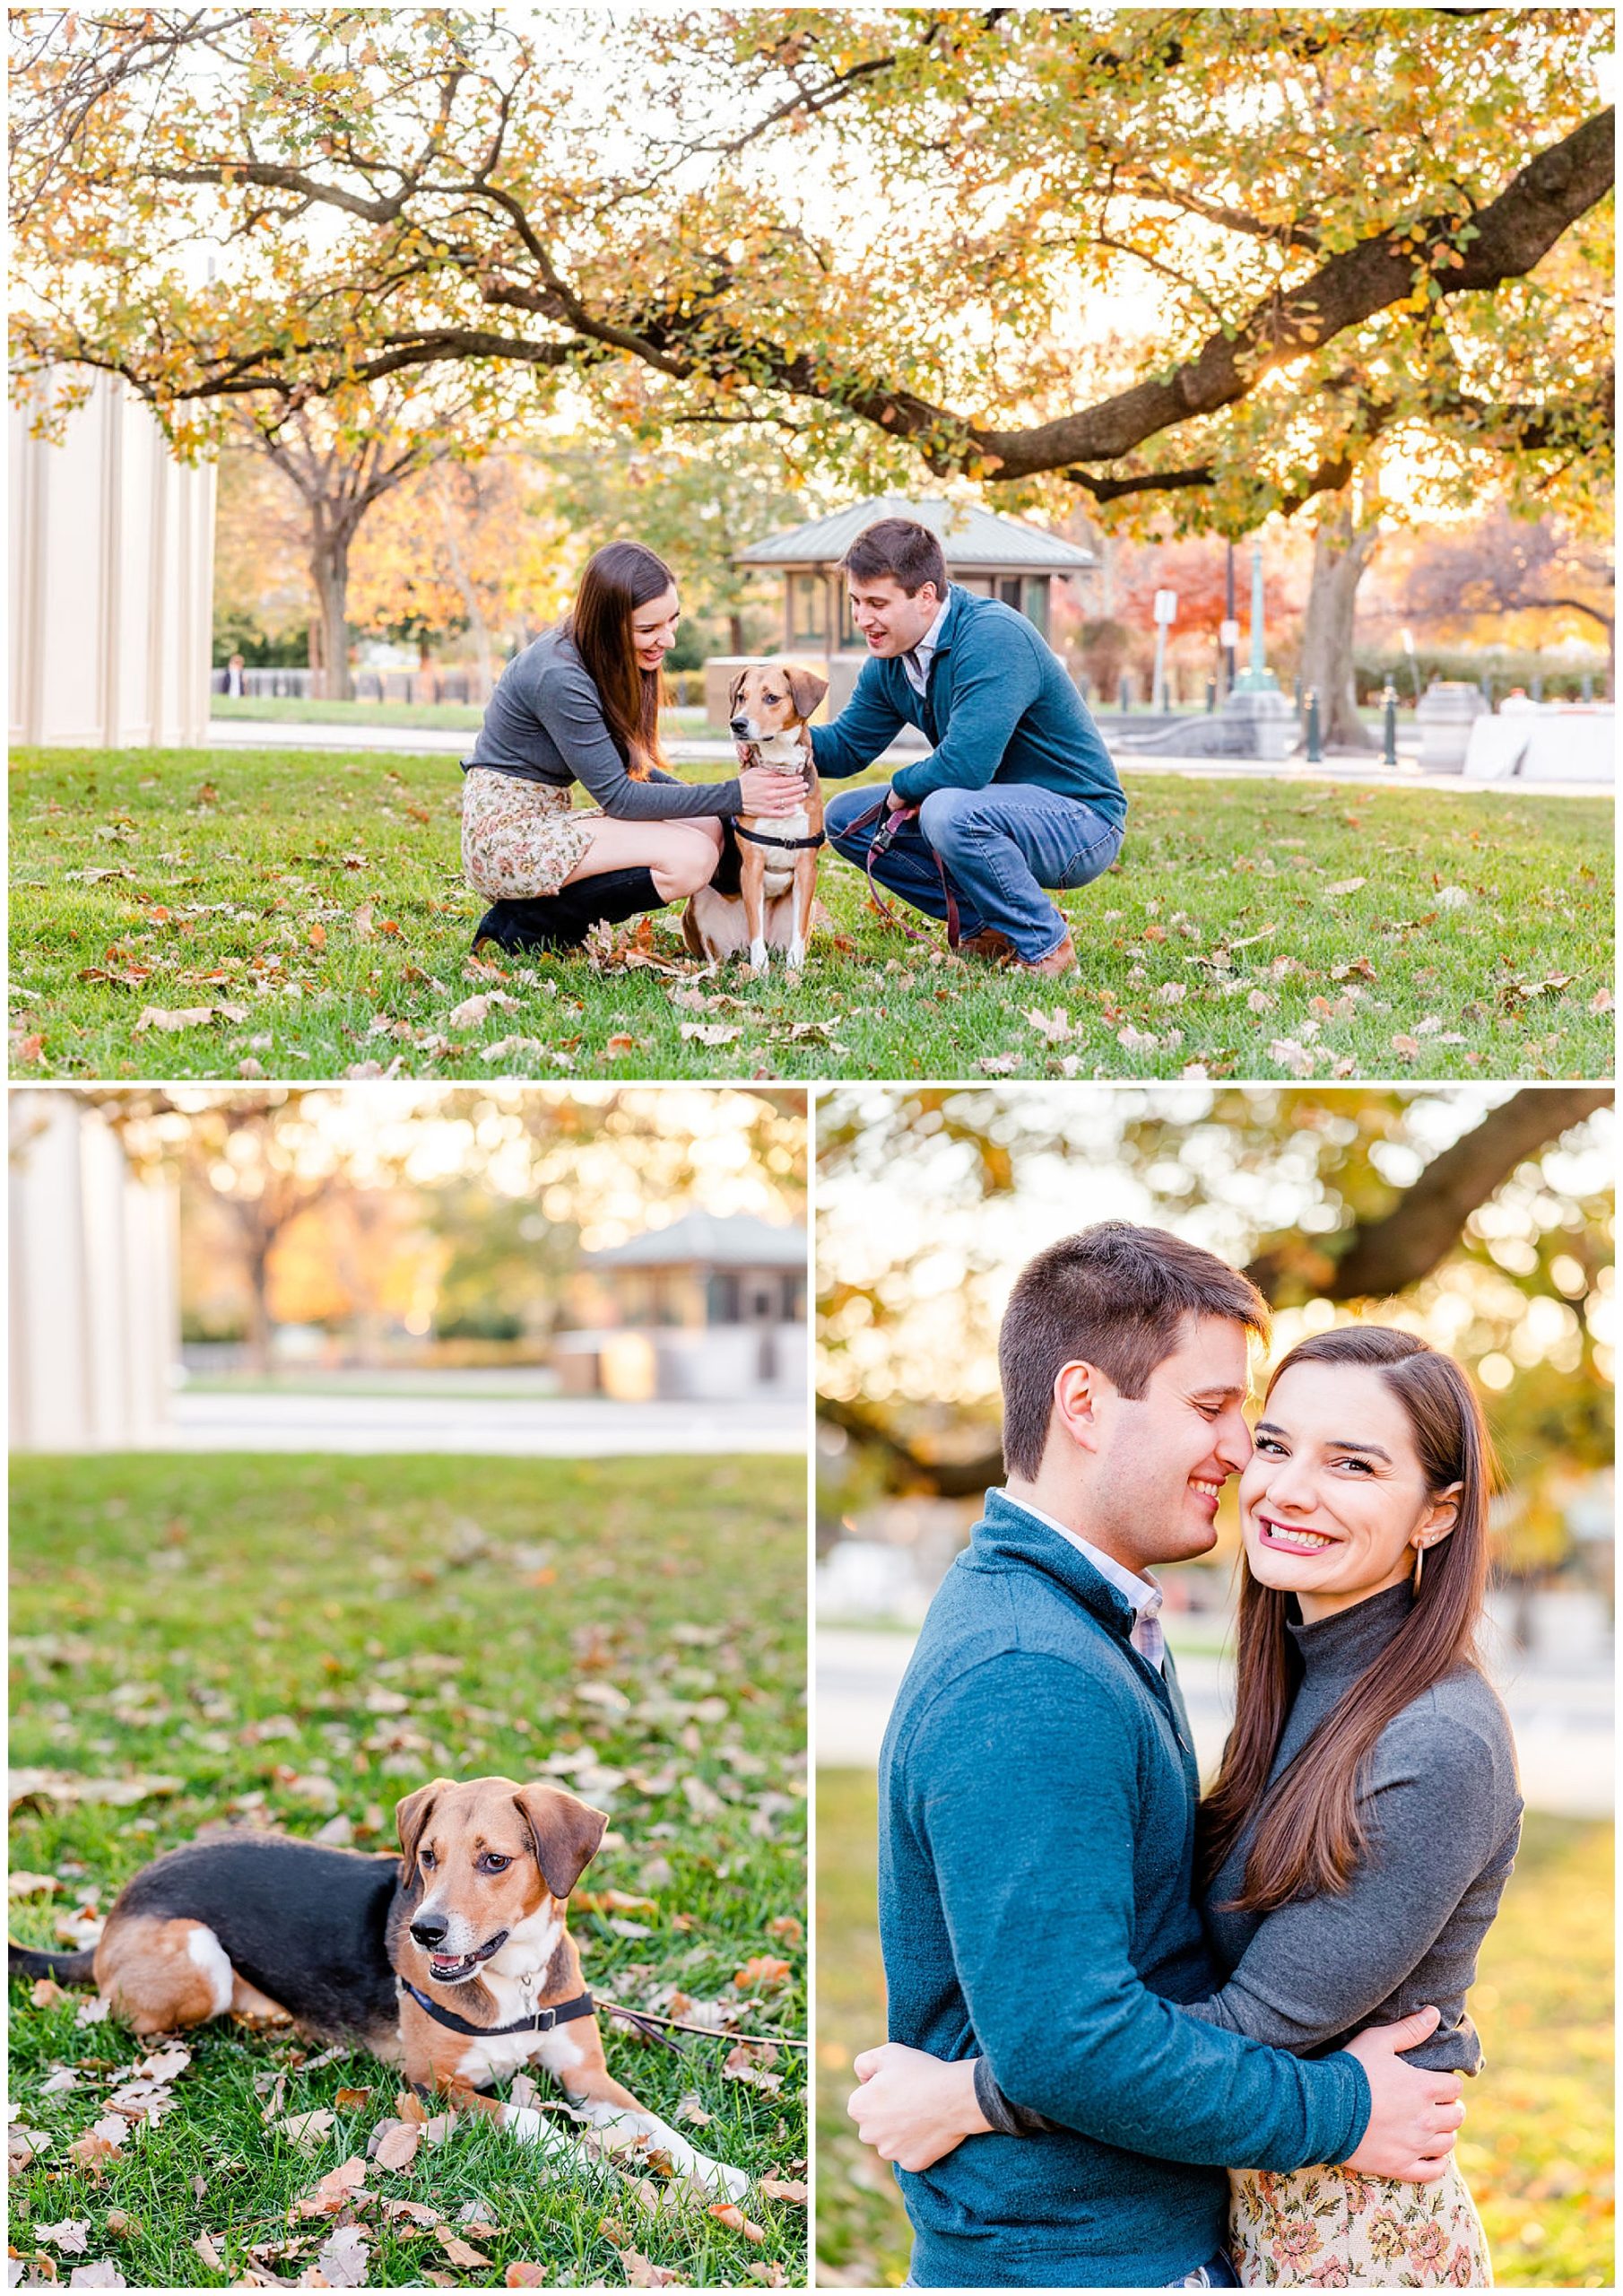 autumn Capitol Hill engagement session, Capitol Hill engagement photos, Capitol Hill photographer, DC engagement photography, DC engagement photographer, DC wedding photography, autumn engagement photos, casual engagement photos, Rachel E.H. Photography, couple petting dog, dog laying in grass, man touching nose to womans cheek